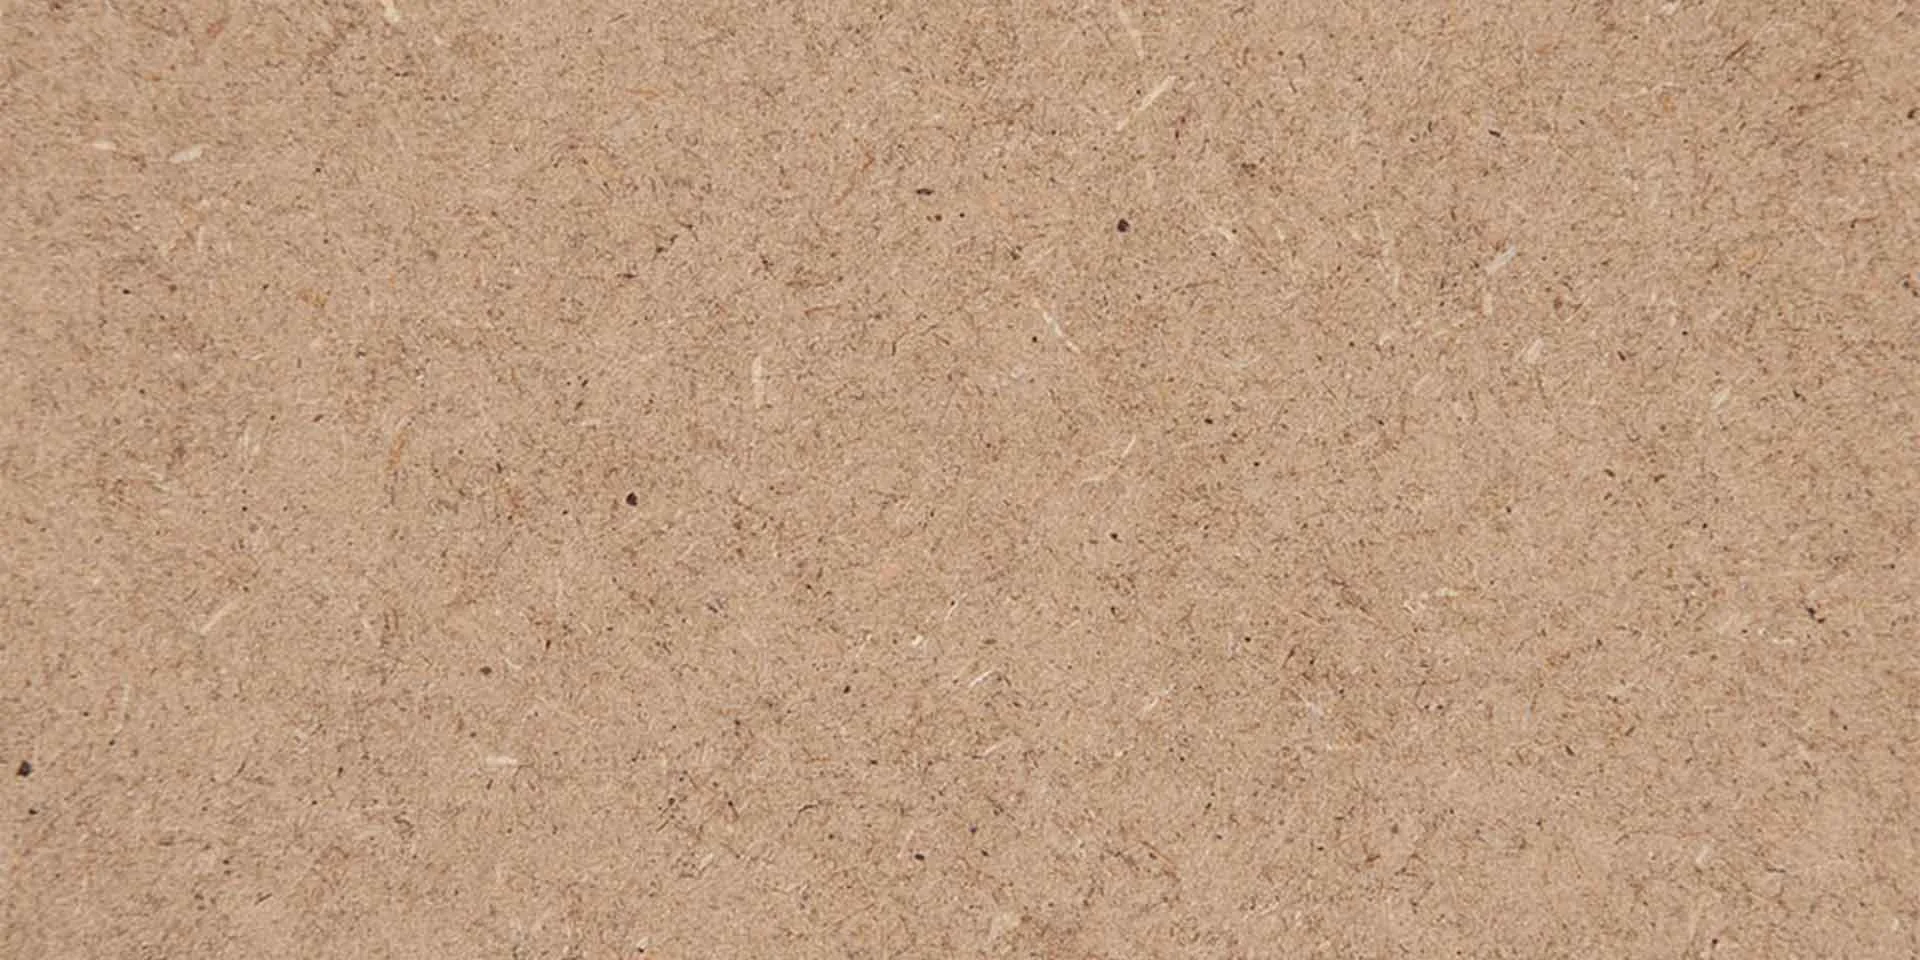 TSFC010 in MDF natural